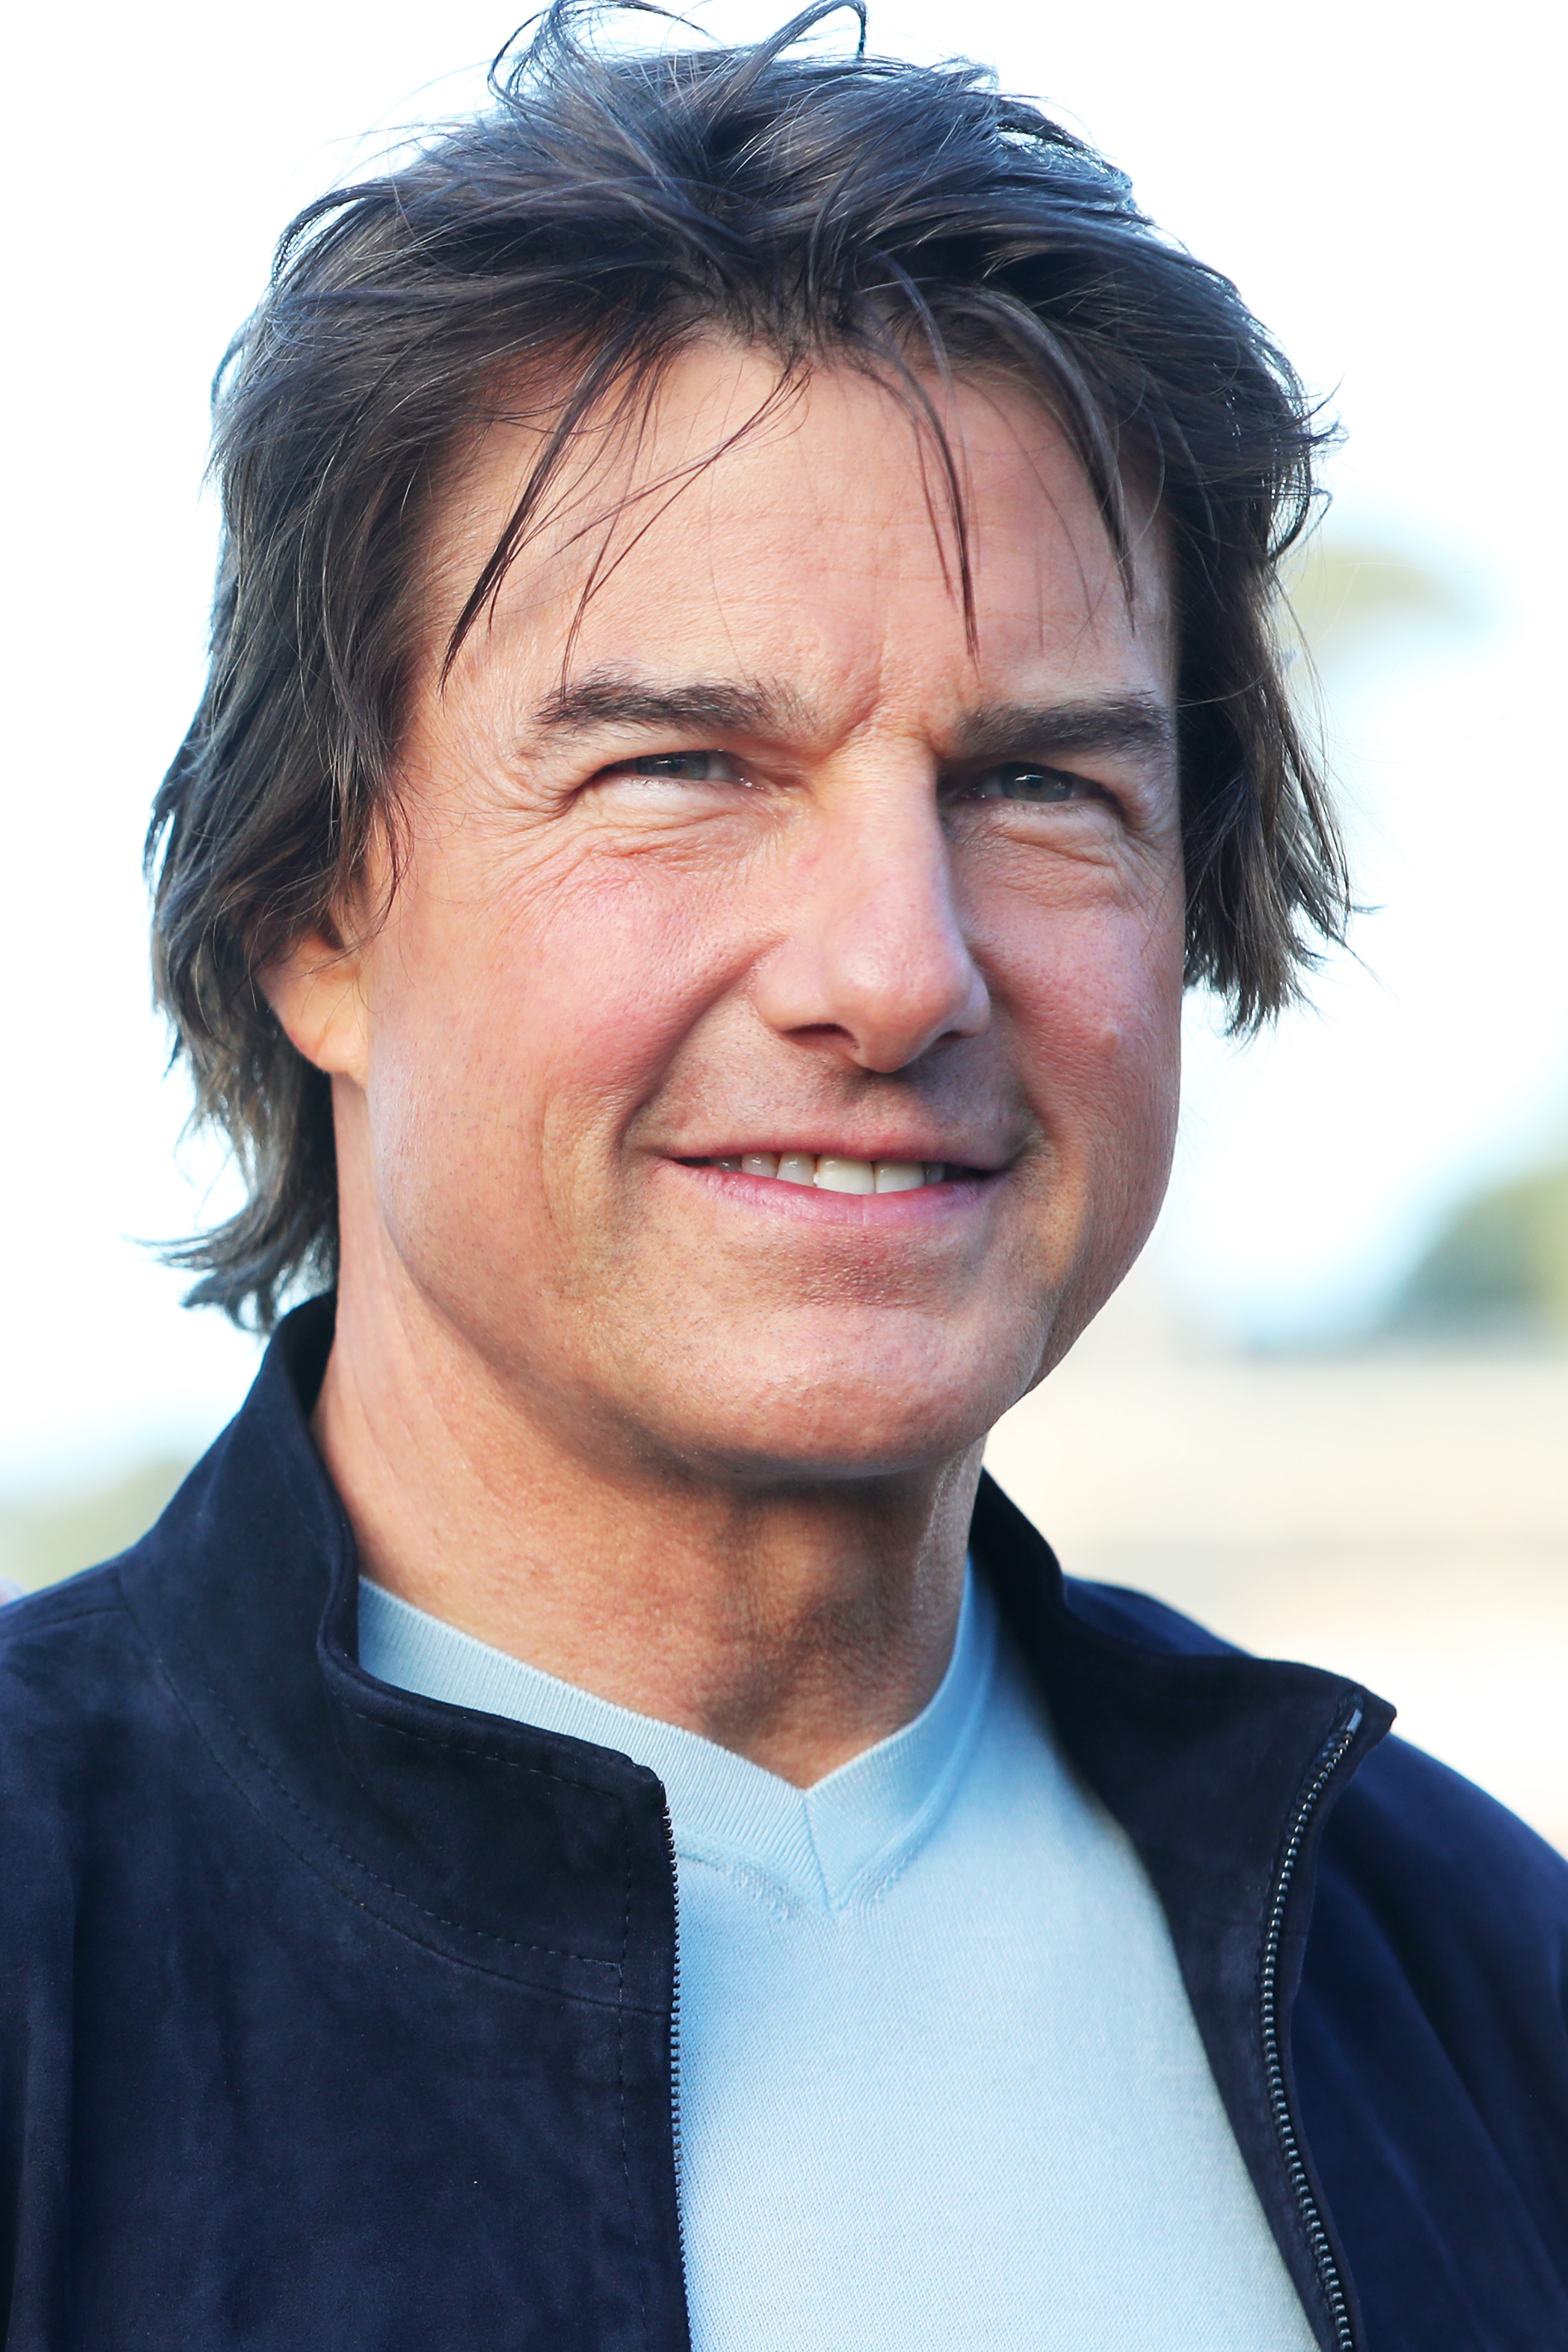 Tom Cruise attends a photo call for "Mission: Impossible" on July 2, 2023 in Sydney, Australia | Source: Getty Images